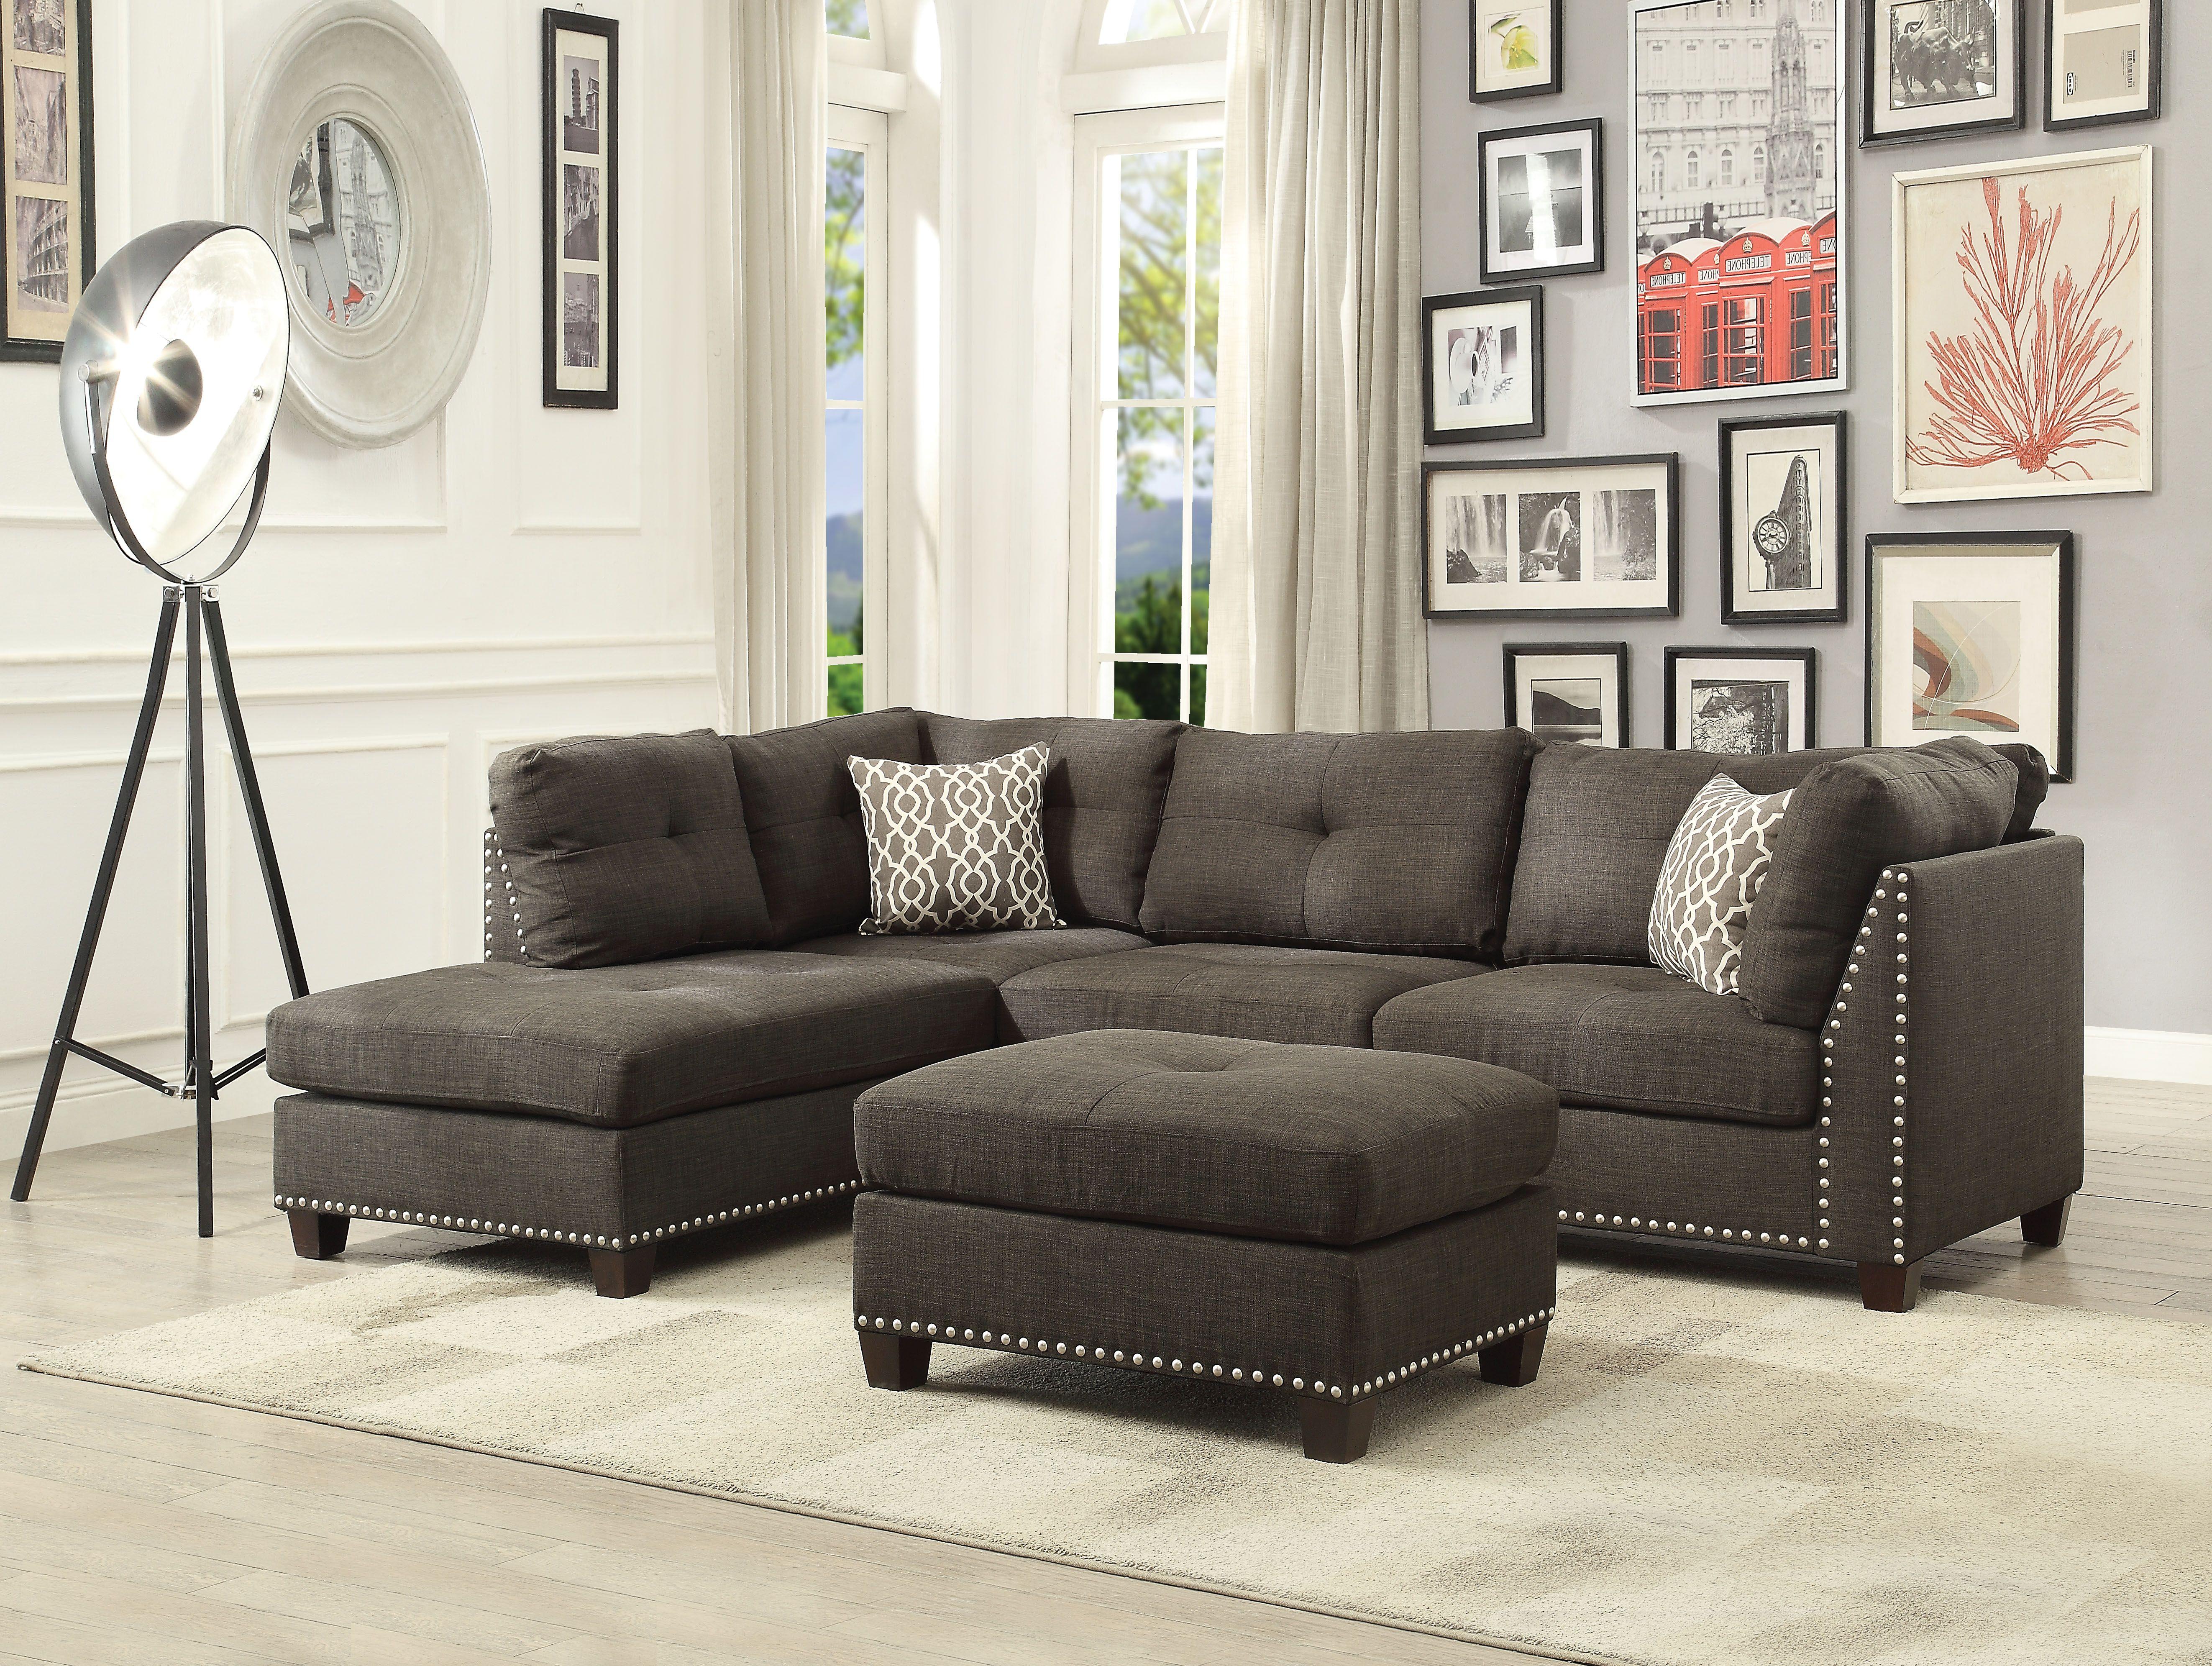 Acme Furniture Laurissa Sectional Sofa and Ottoman